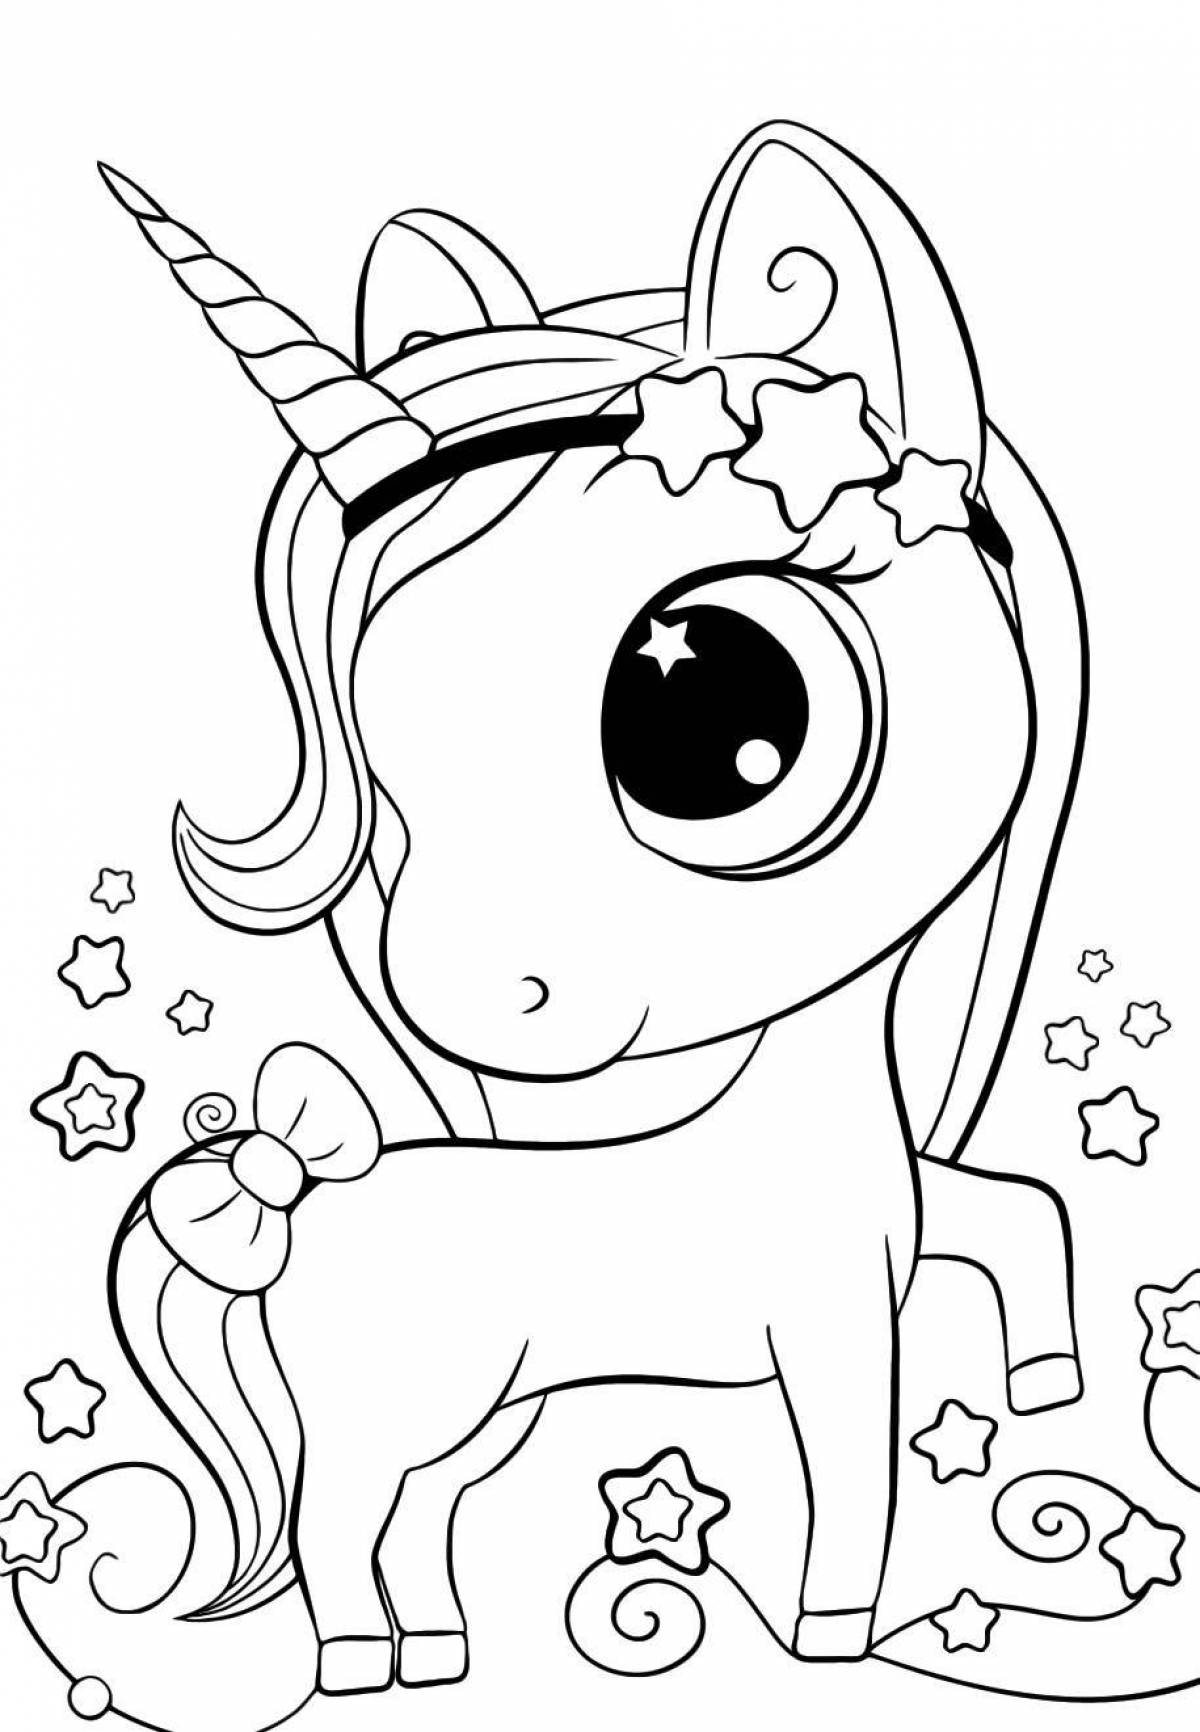 Whimsical coloring book for girls with unicorn print